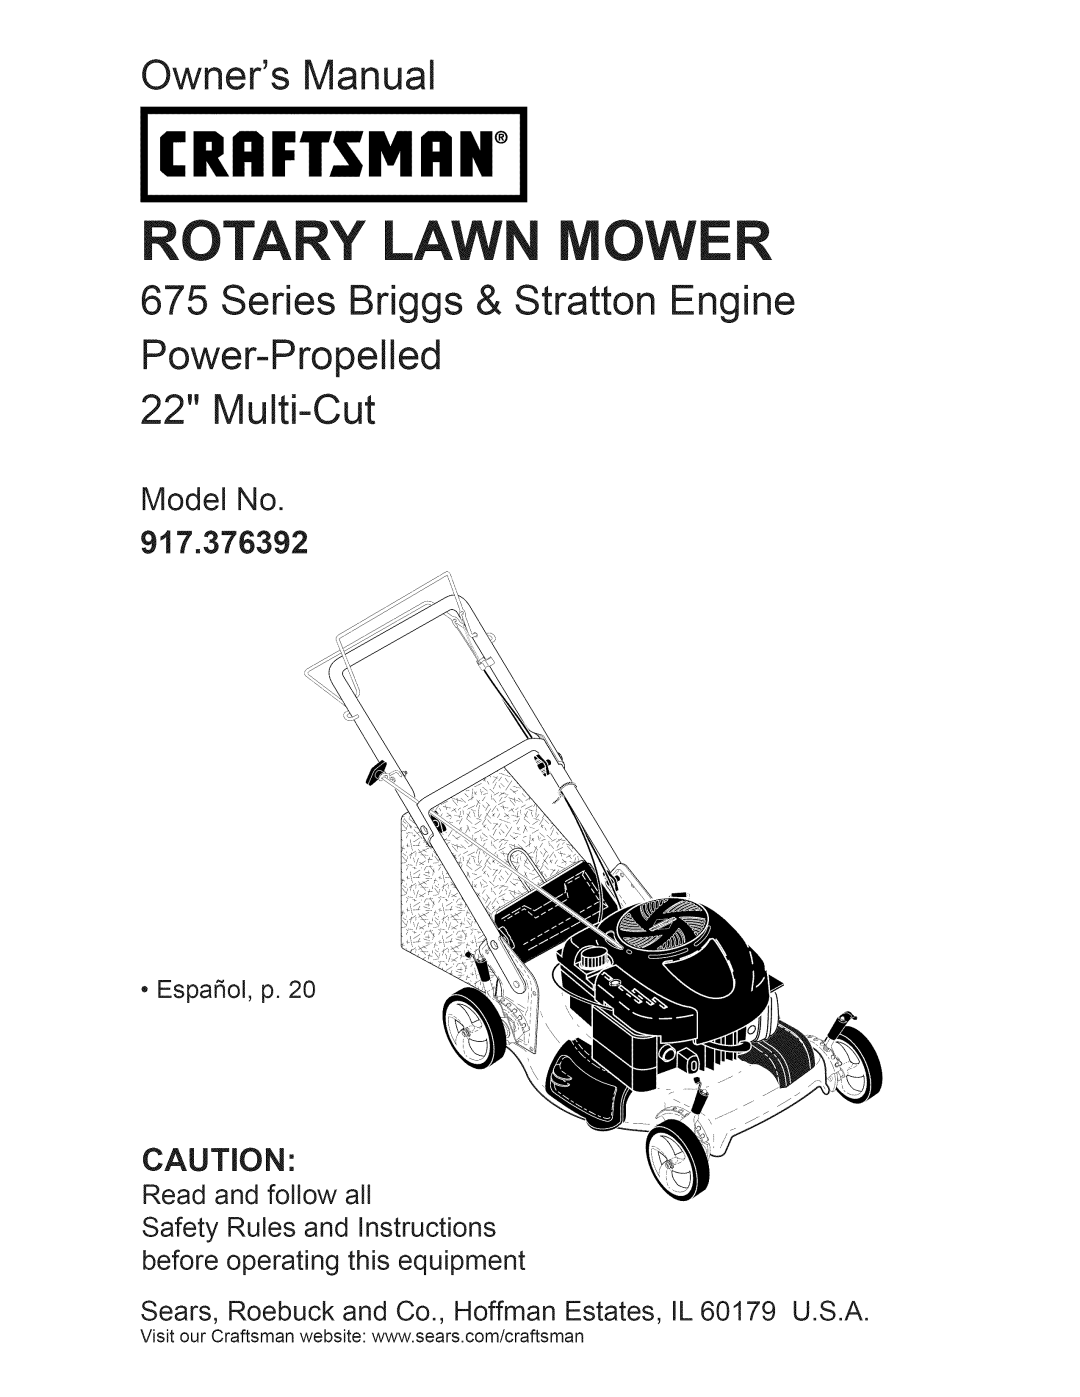 Craftsman manual Model No 917.376392, Craftsman, Rotary Lawn Mower, Owners Manual, Series Briggs & Stratton Engine 